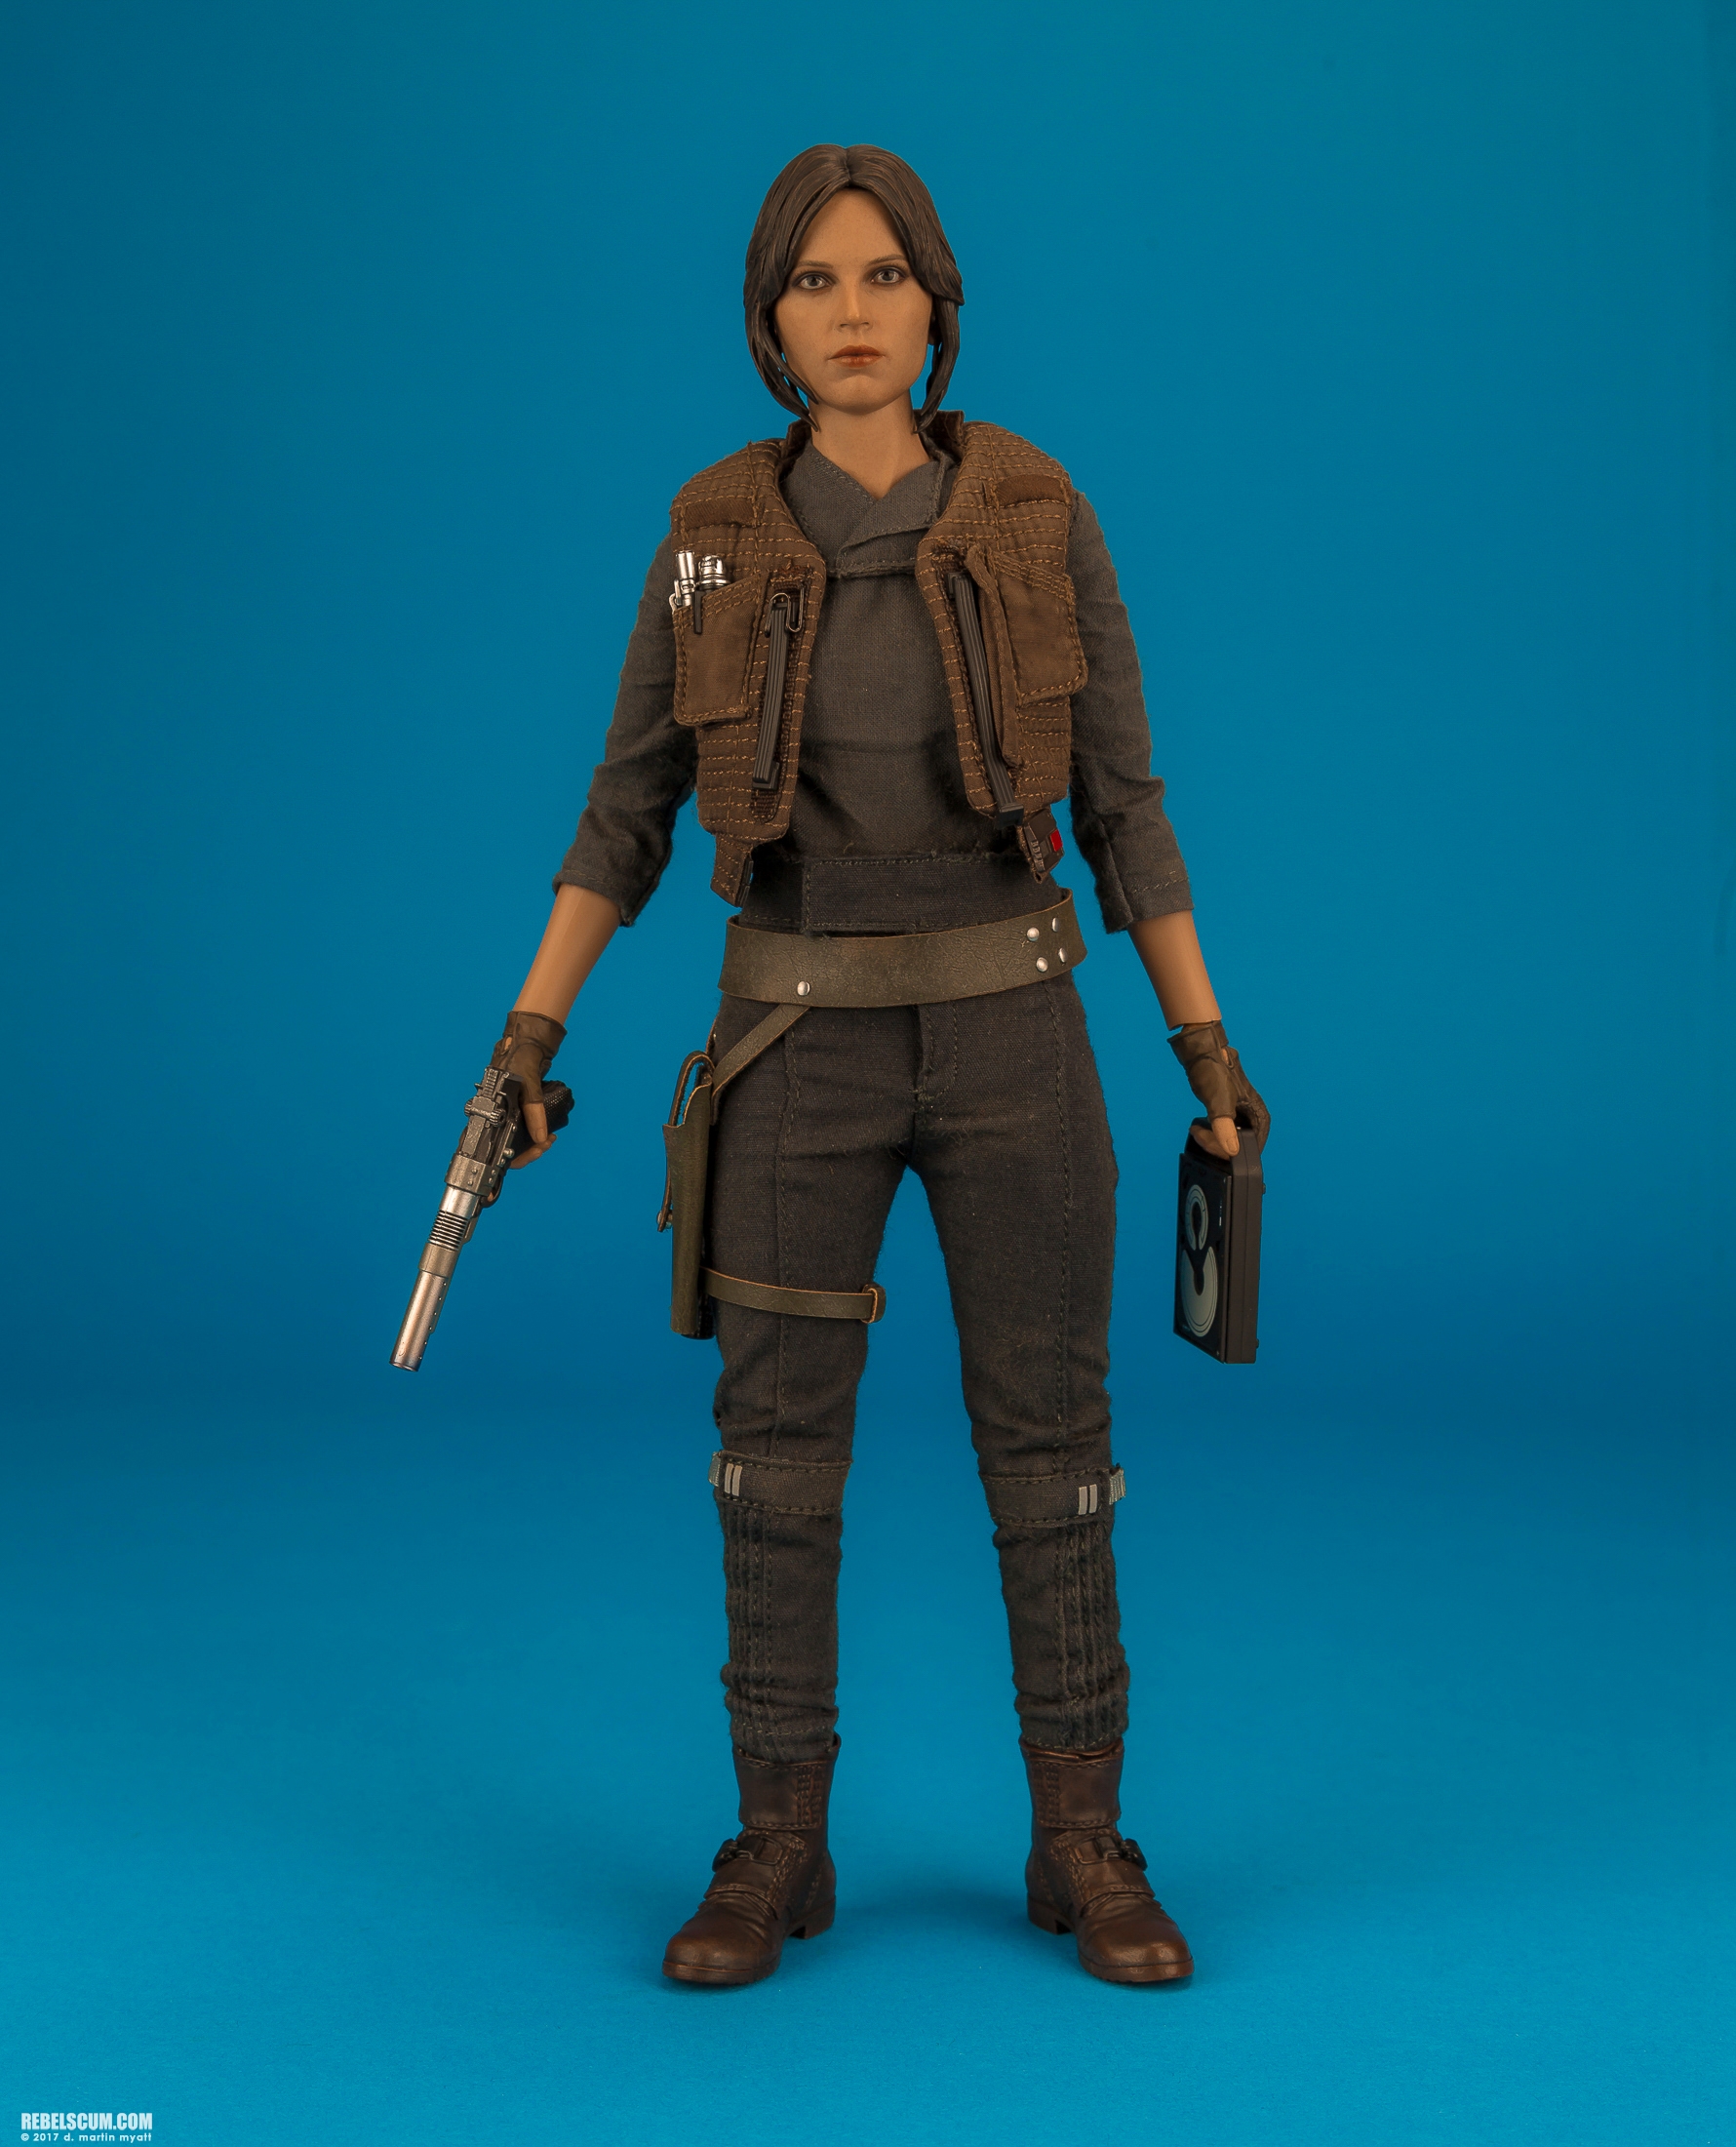 MMS405-Jyn-Erso-Deluxe-Star-Wars-Rogue-One-Hot-Toys-025.jpg